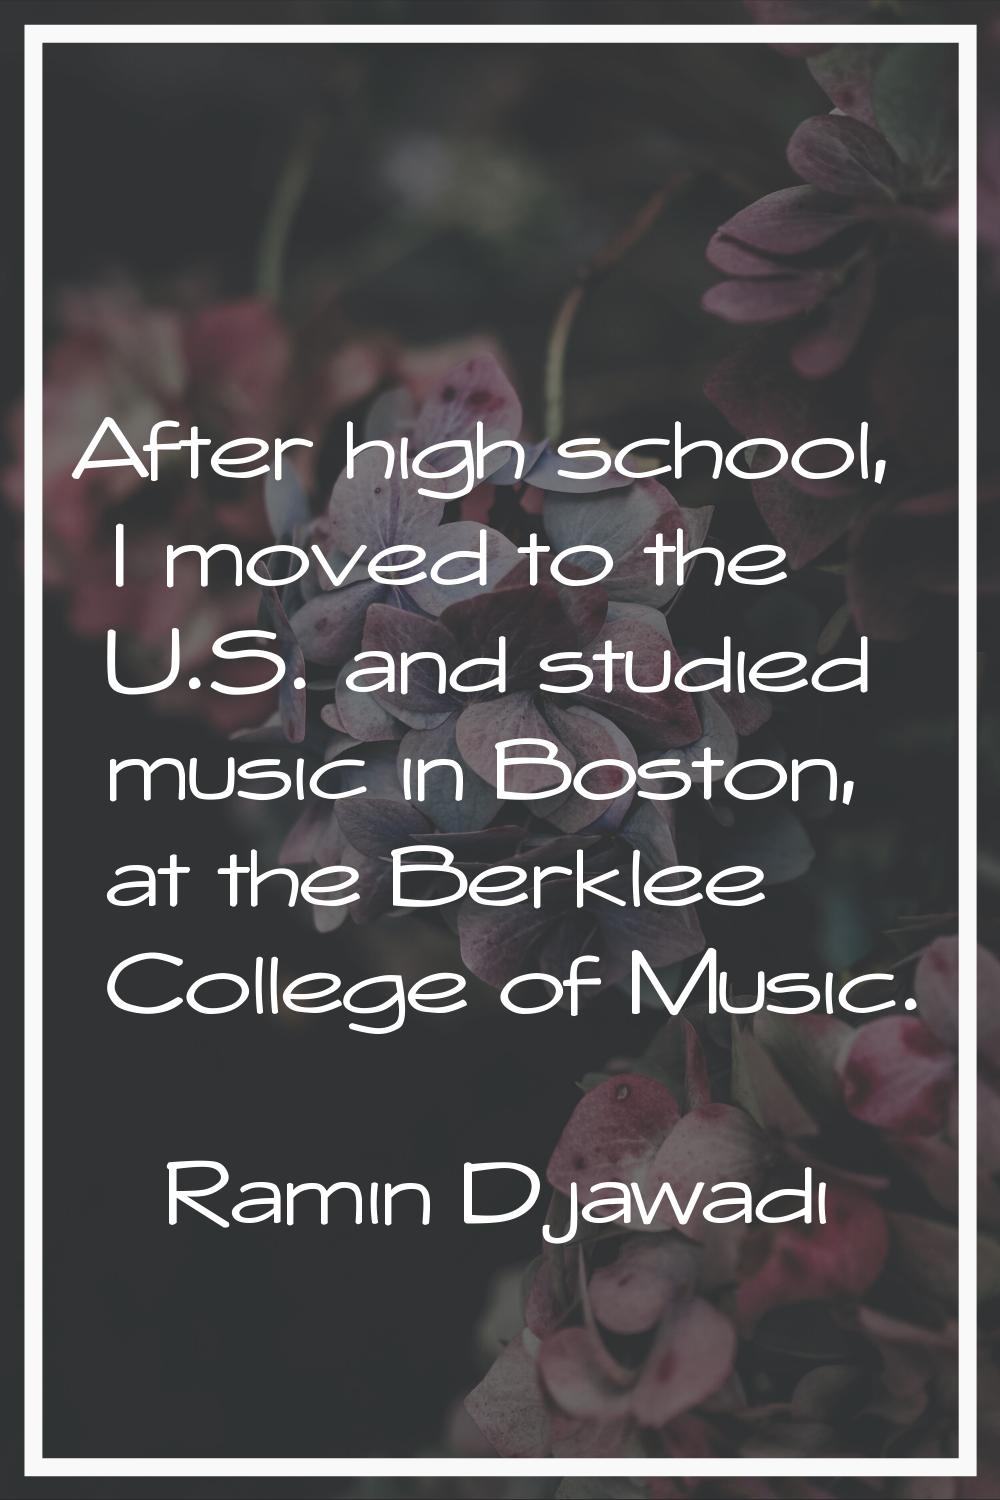 After high school, I moved to the U.S. and studied music in Boston, at the Berklee College of Music